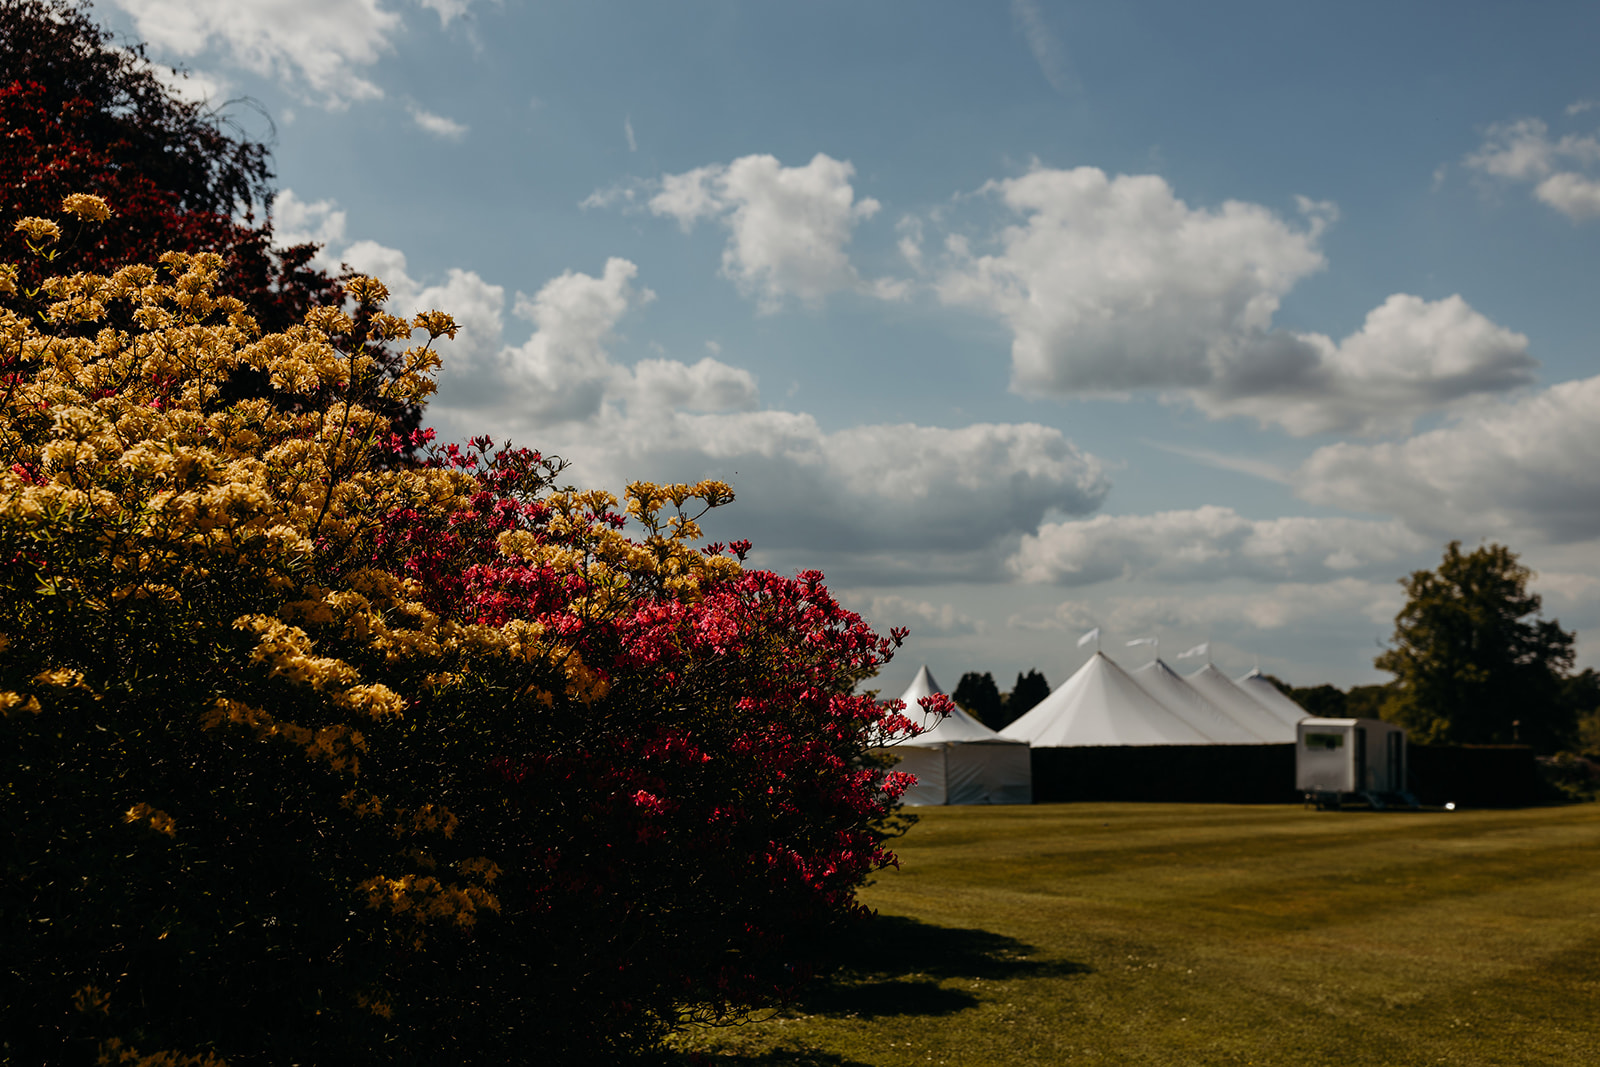 The estate gardens at Buckhurst Park provide a picturesque setting for the wedding reception.